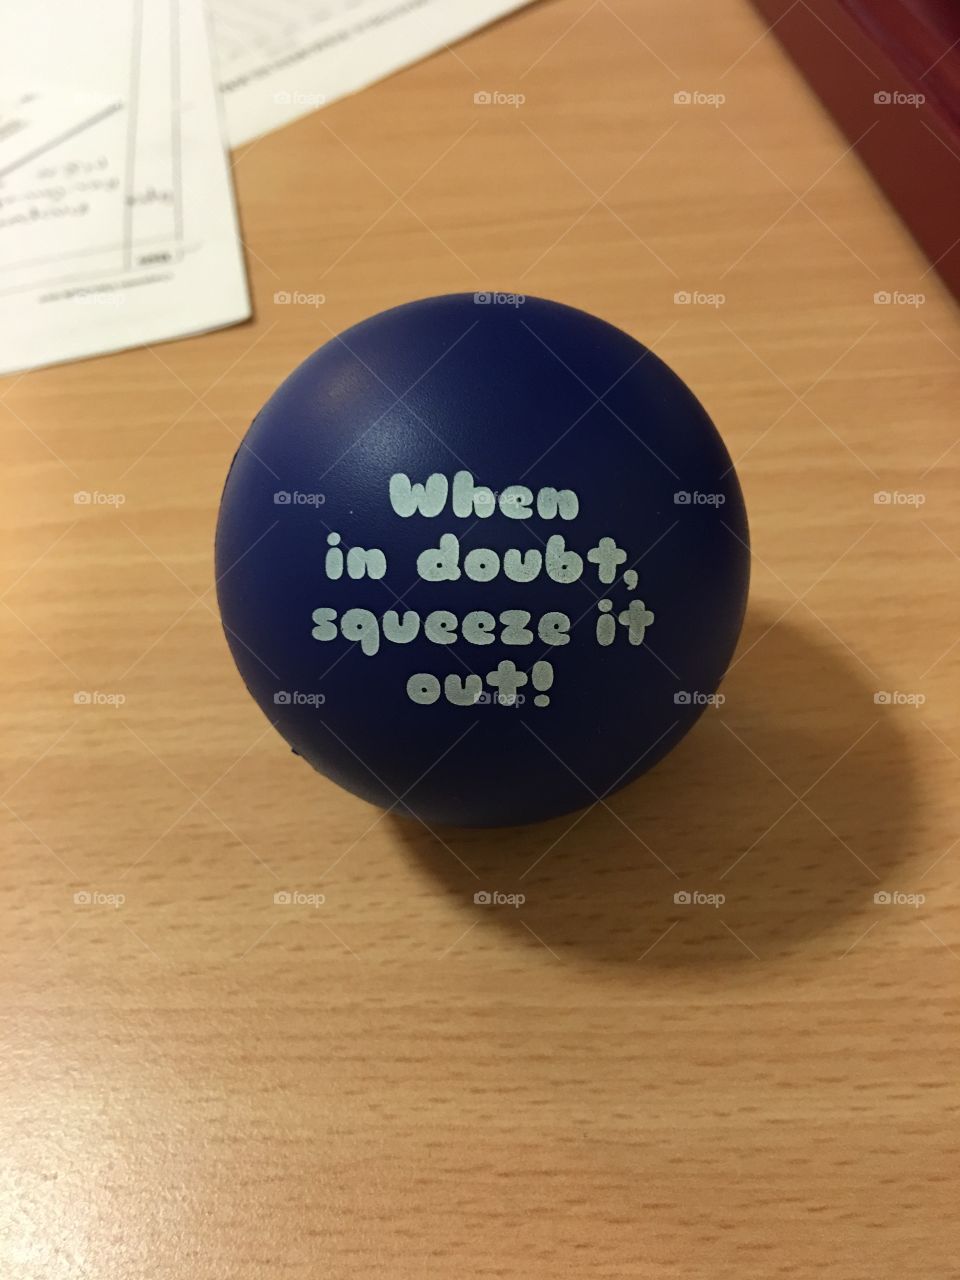 If in doubt squeeze it